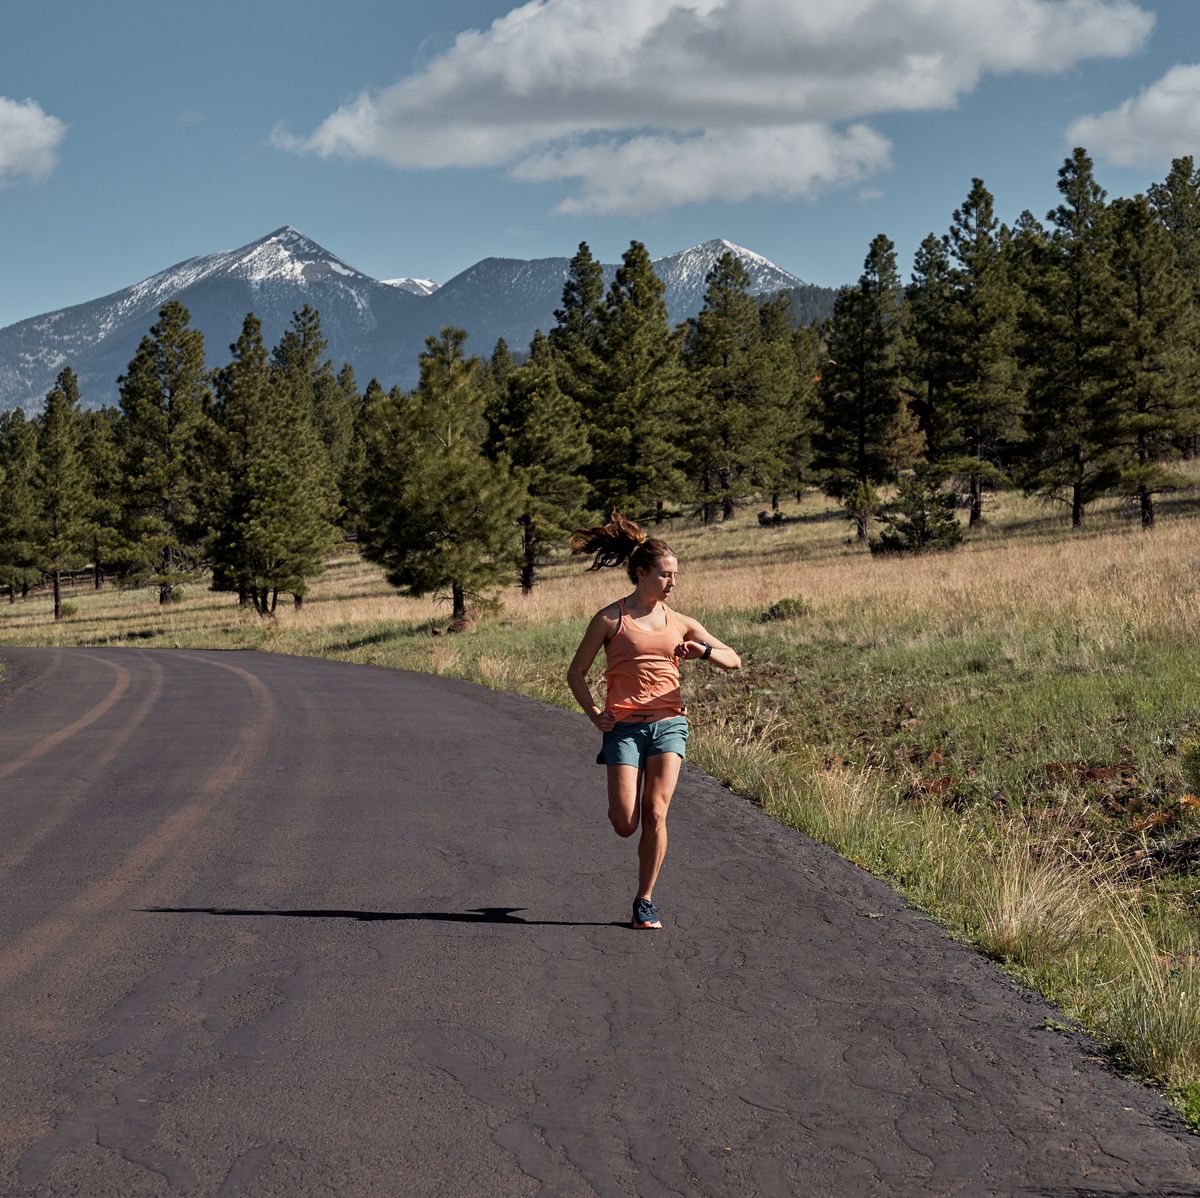 Speed Training for Long Distance Runners